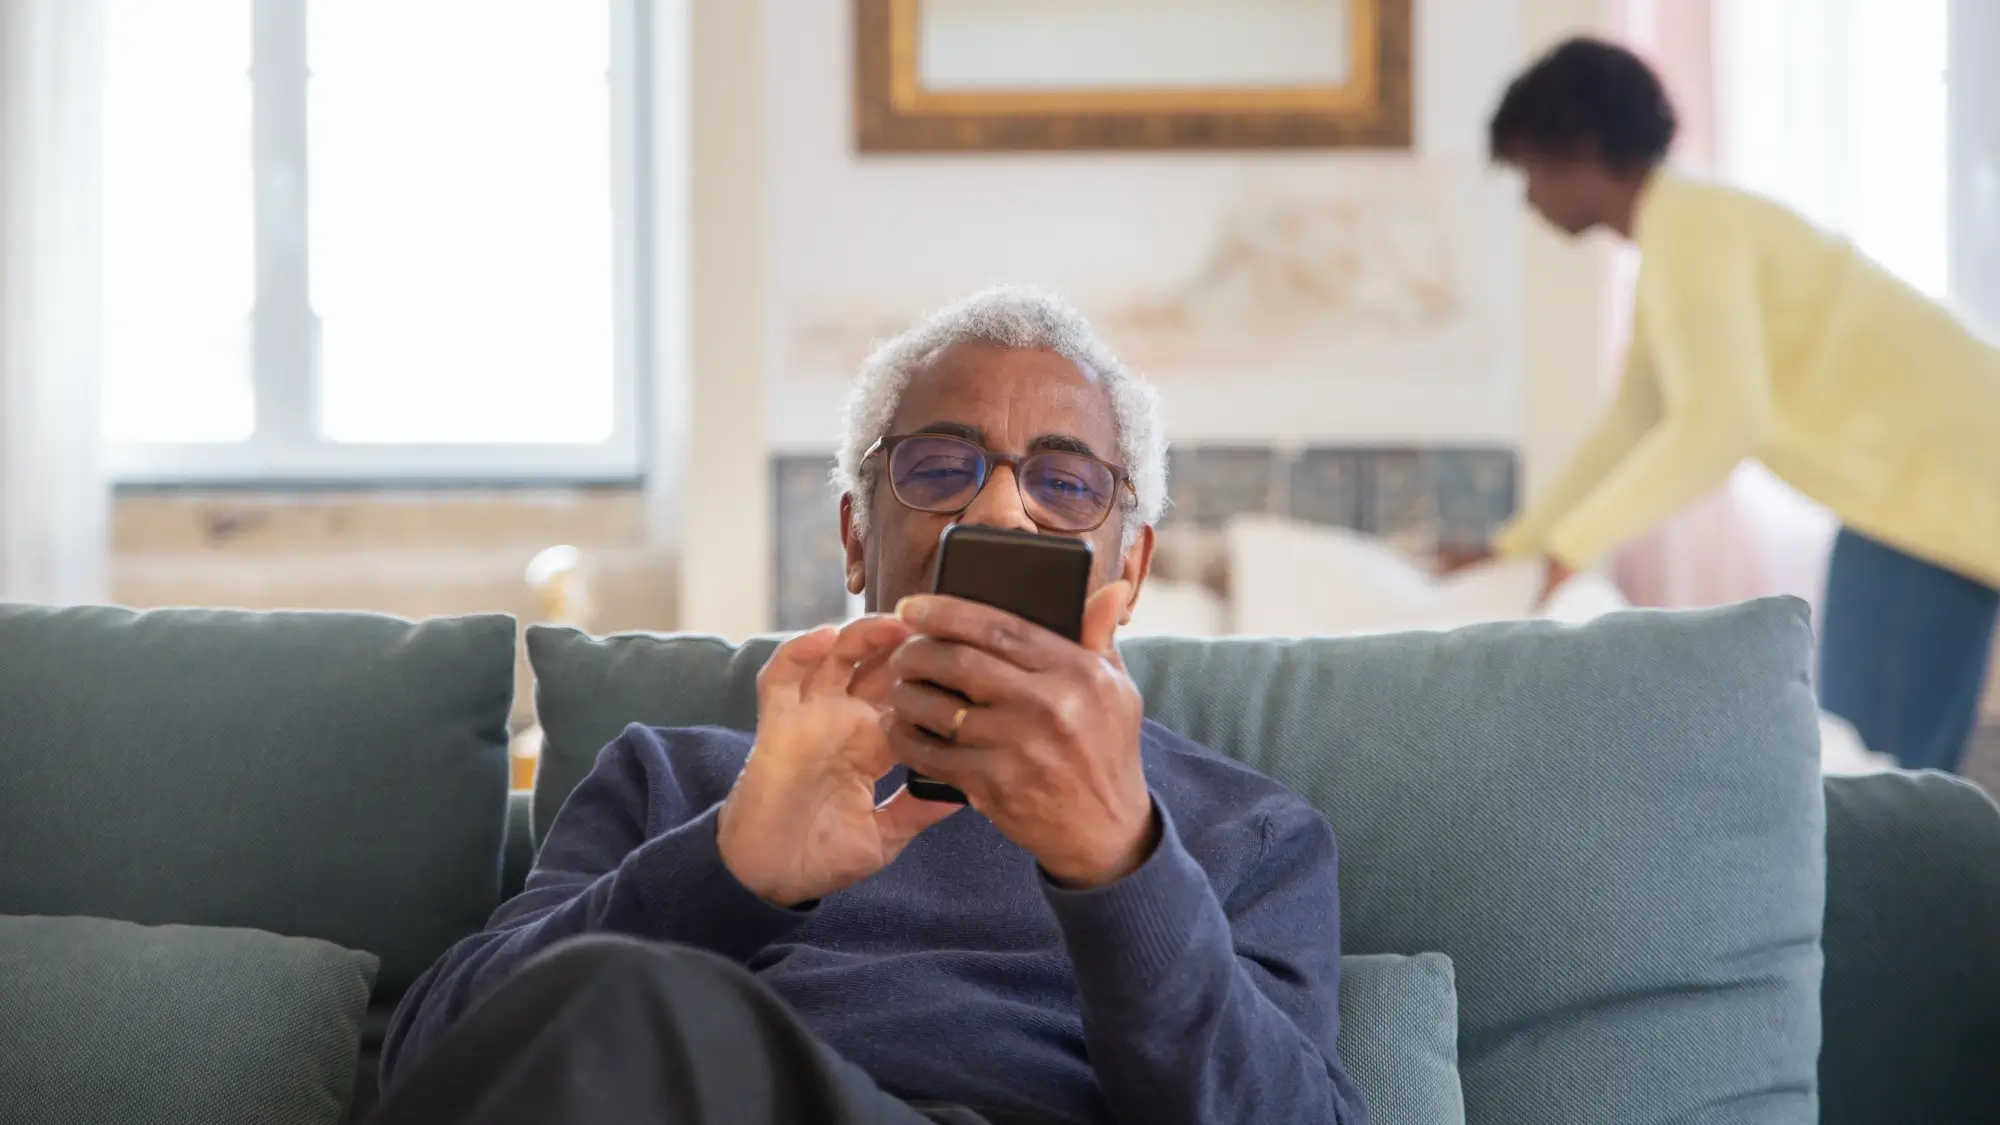 An Elderly Man Sitting on the Couch while Using His Mobile Phone